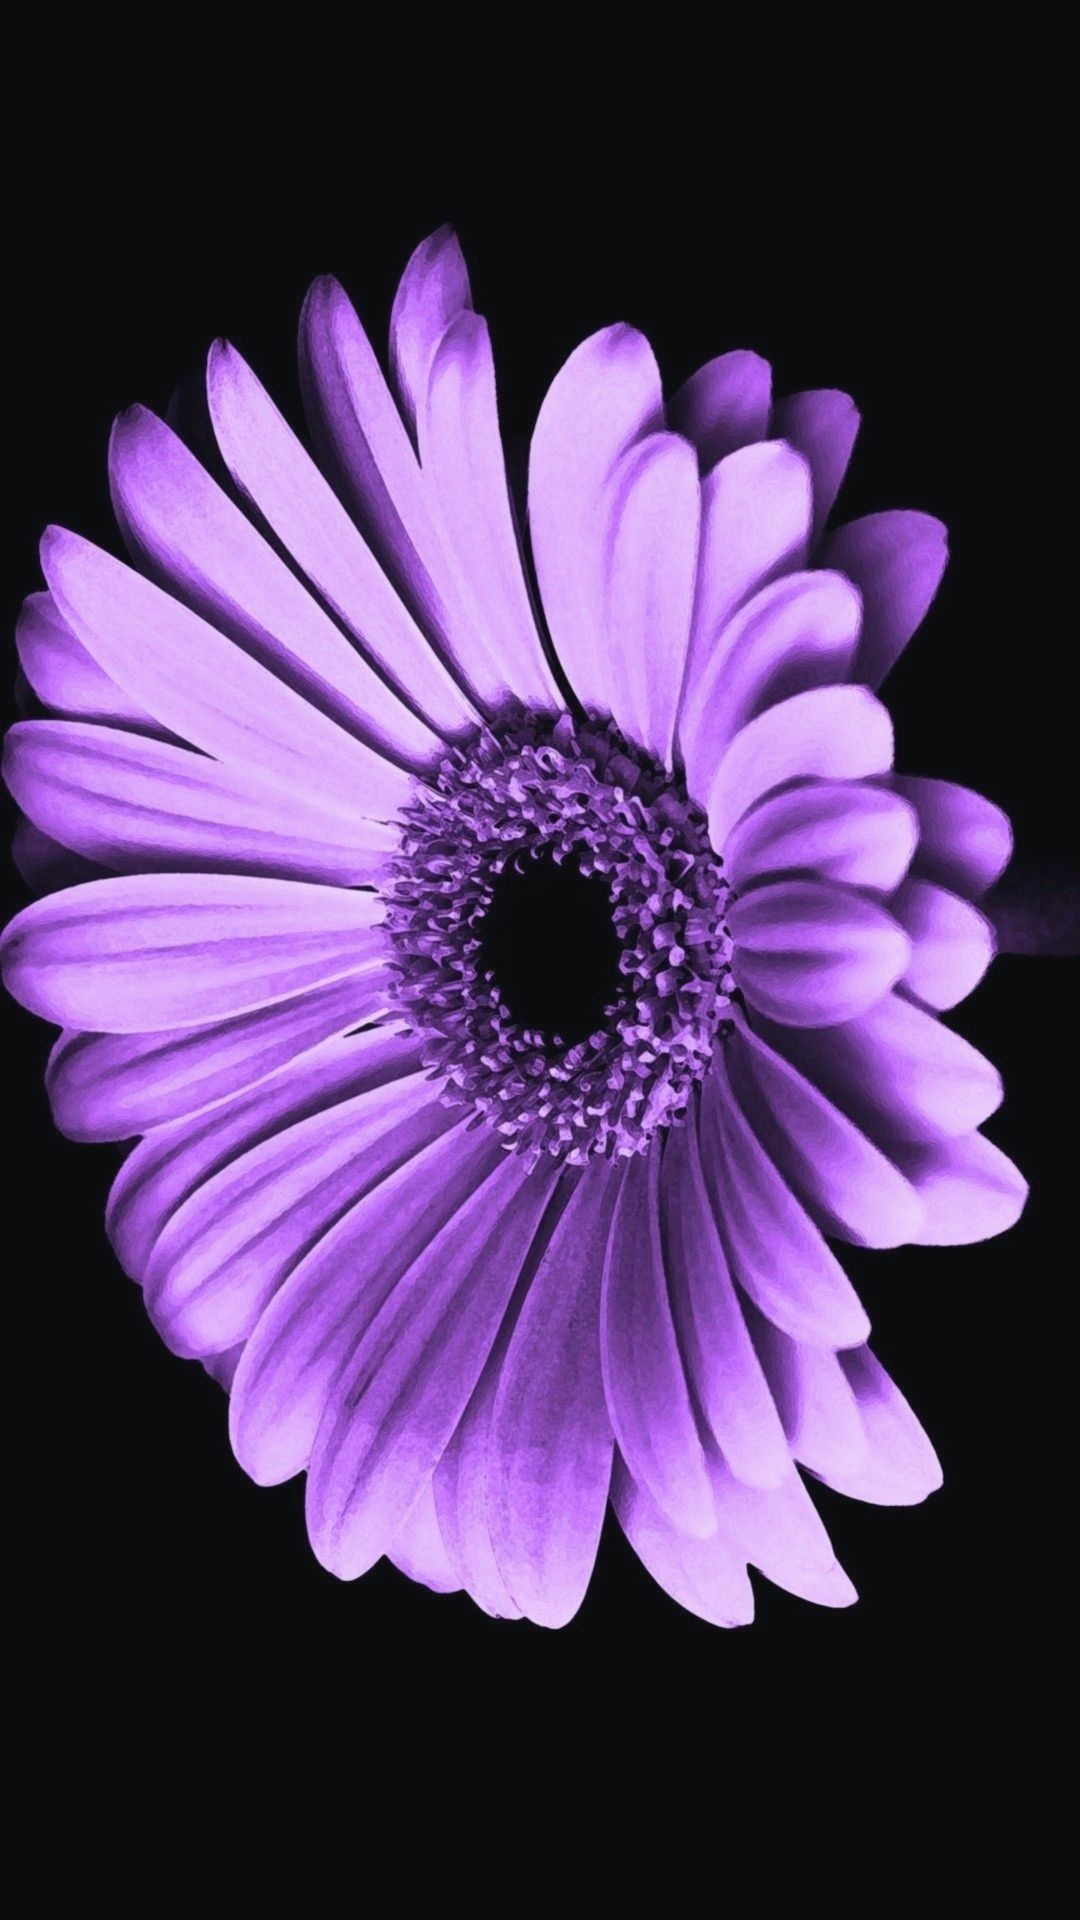 Gerbera Daisy: Known for its vibrant colors and variety of different sizes. 1080x1920 Full HD Wallpaper.